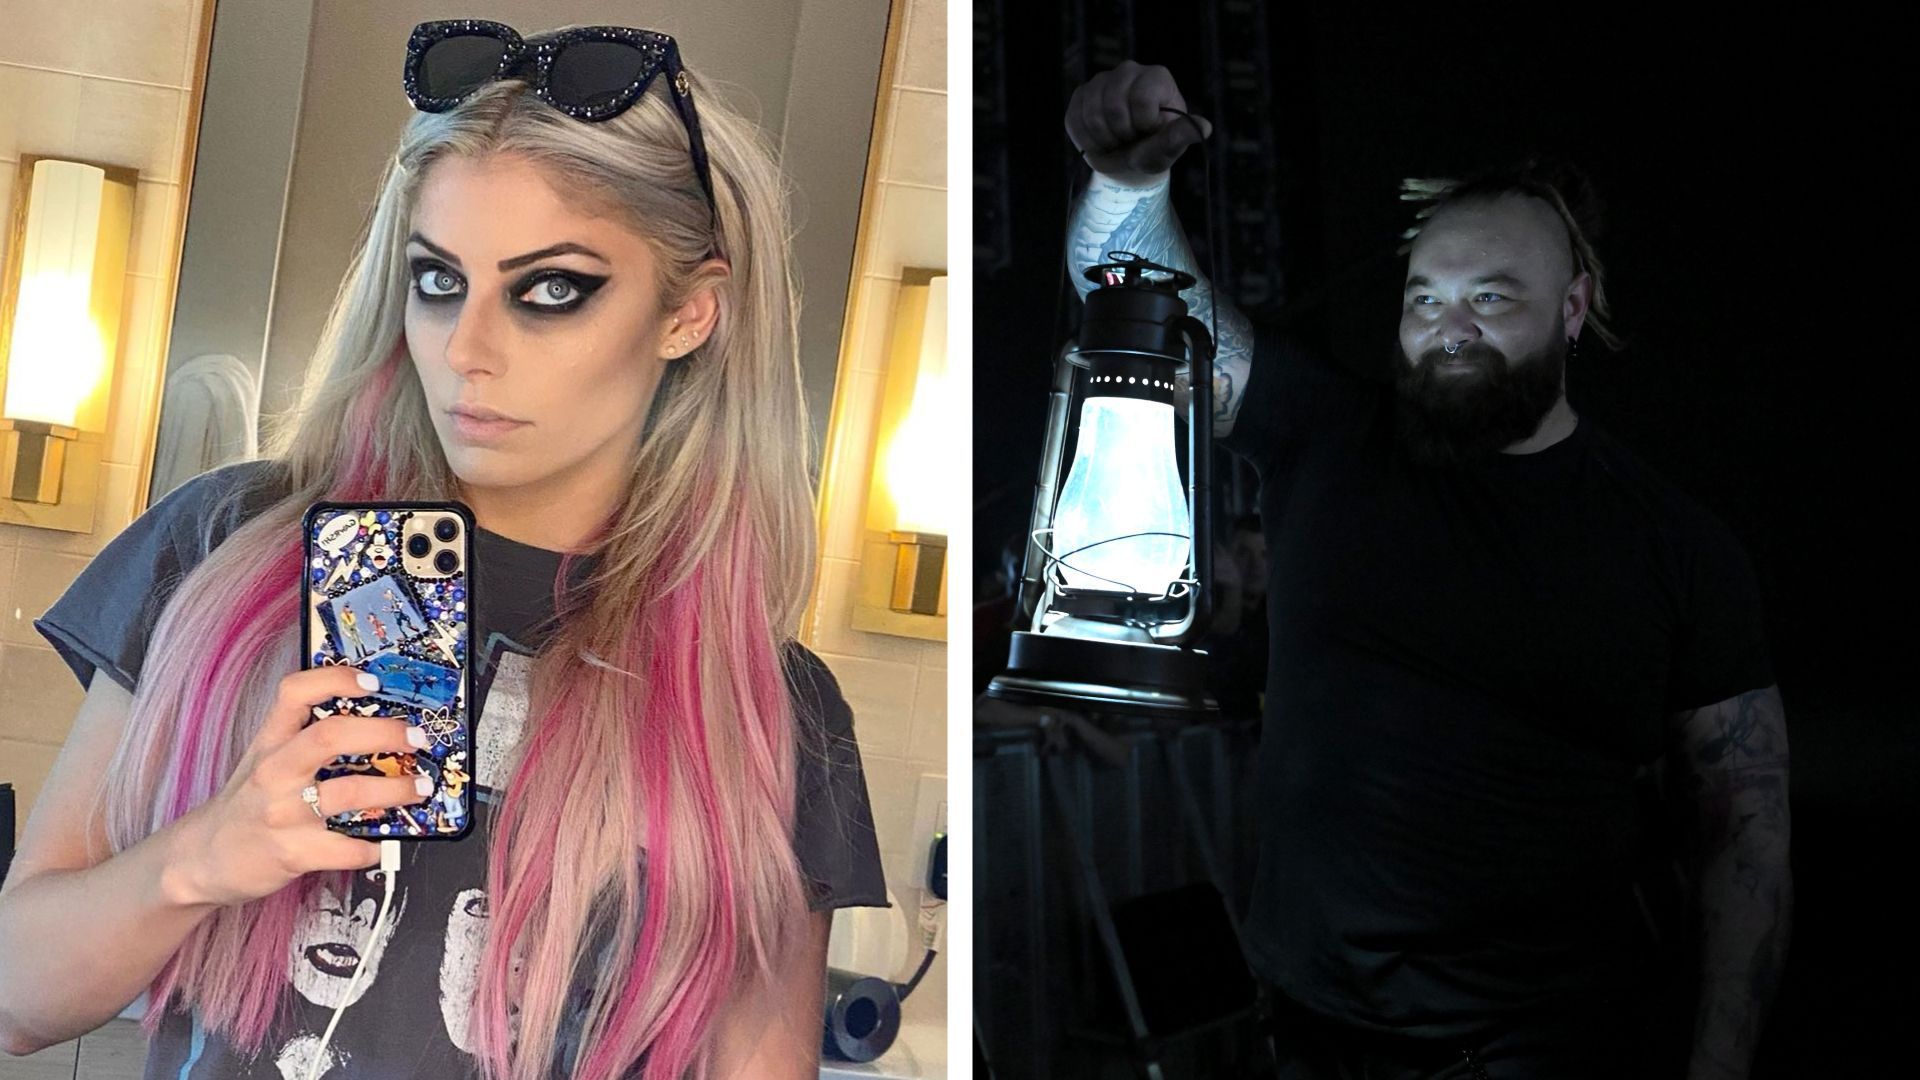 Could Alexa Bliss potentially reunite with Bray Wyatt in WWE?